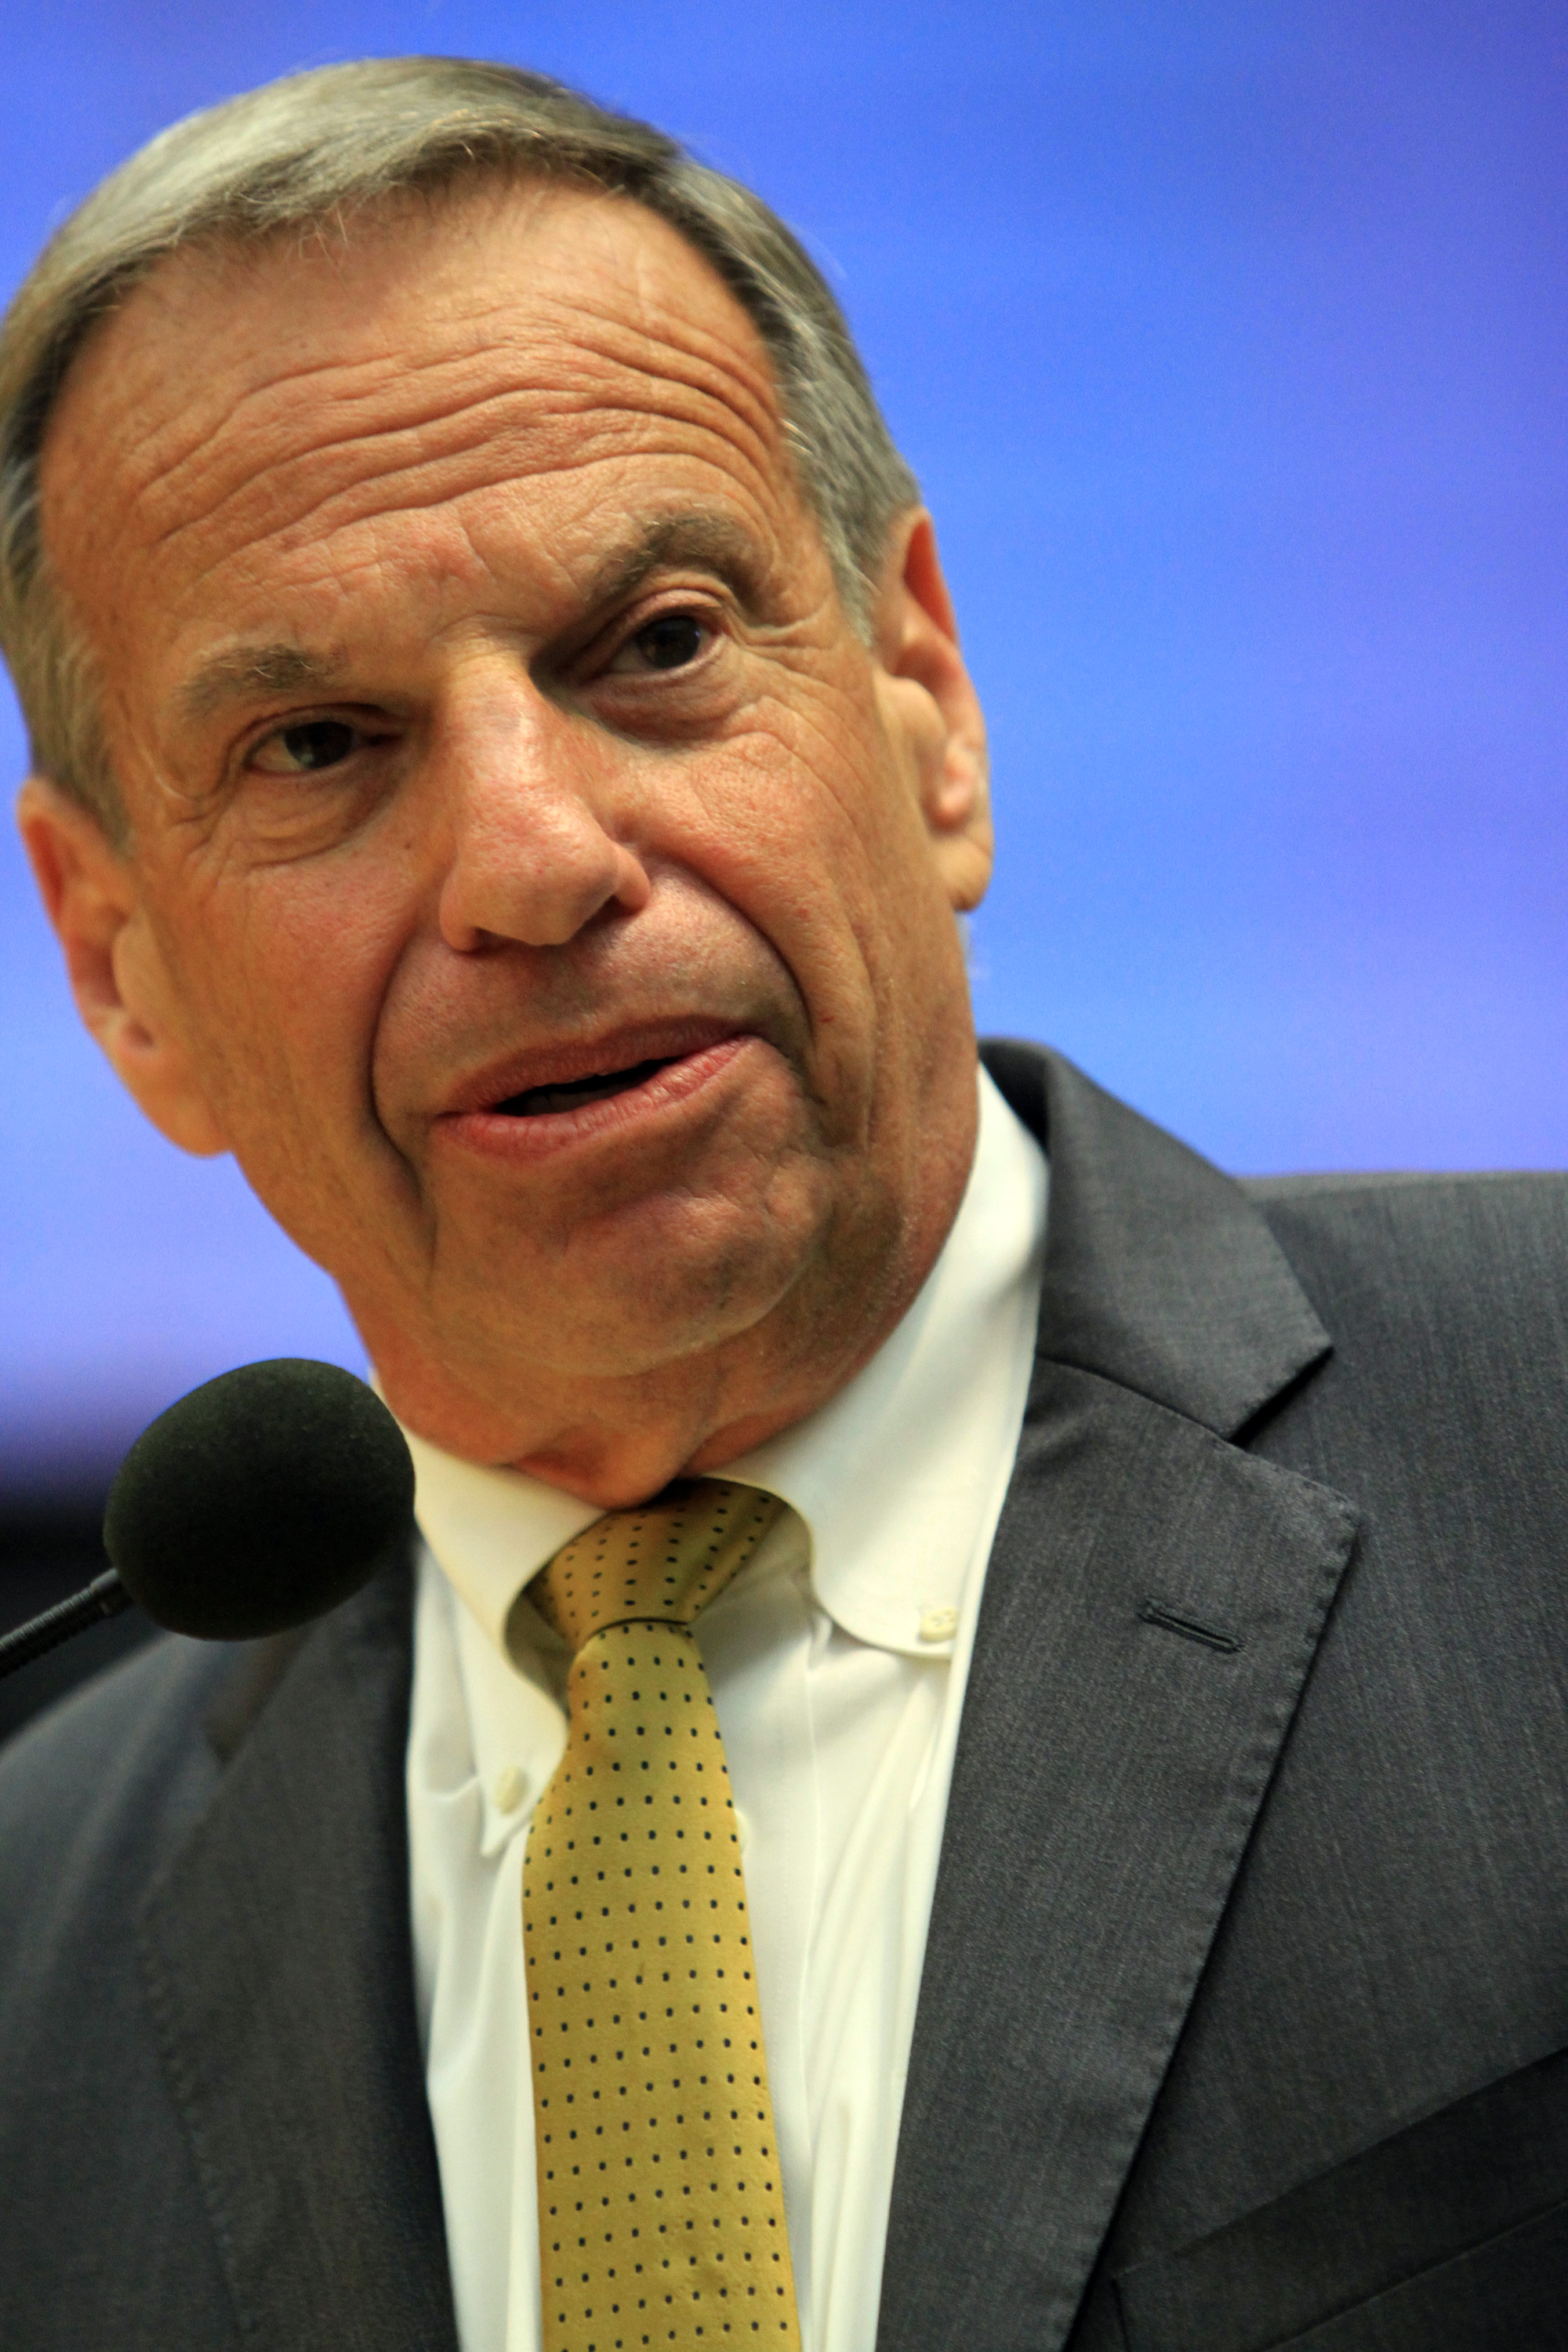 San Diego mayor Bob Filner announces his mayoral resignation to the city council on July 26, 2013 in San Diego, Calif. (Bill Wechter&mdash;Getty Images)